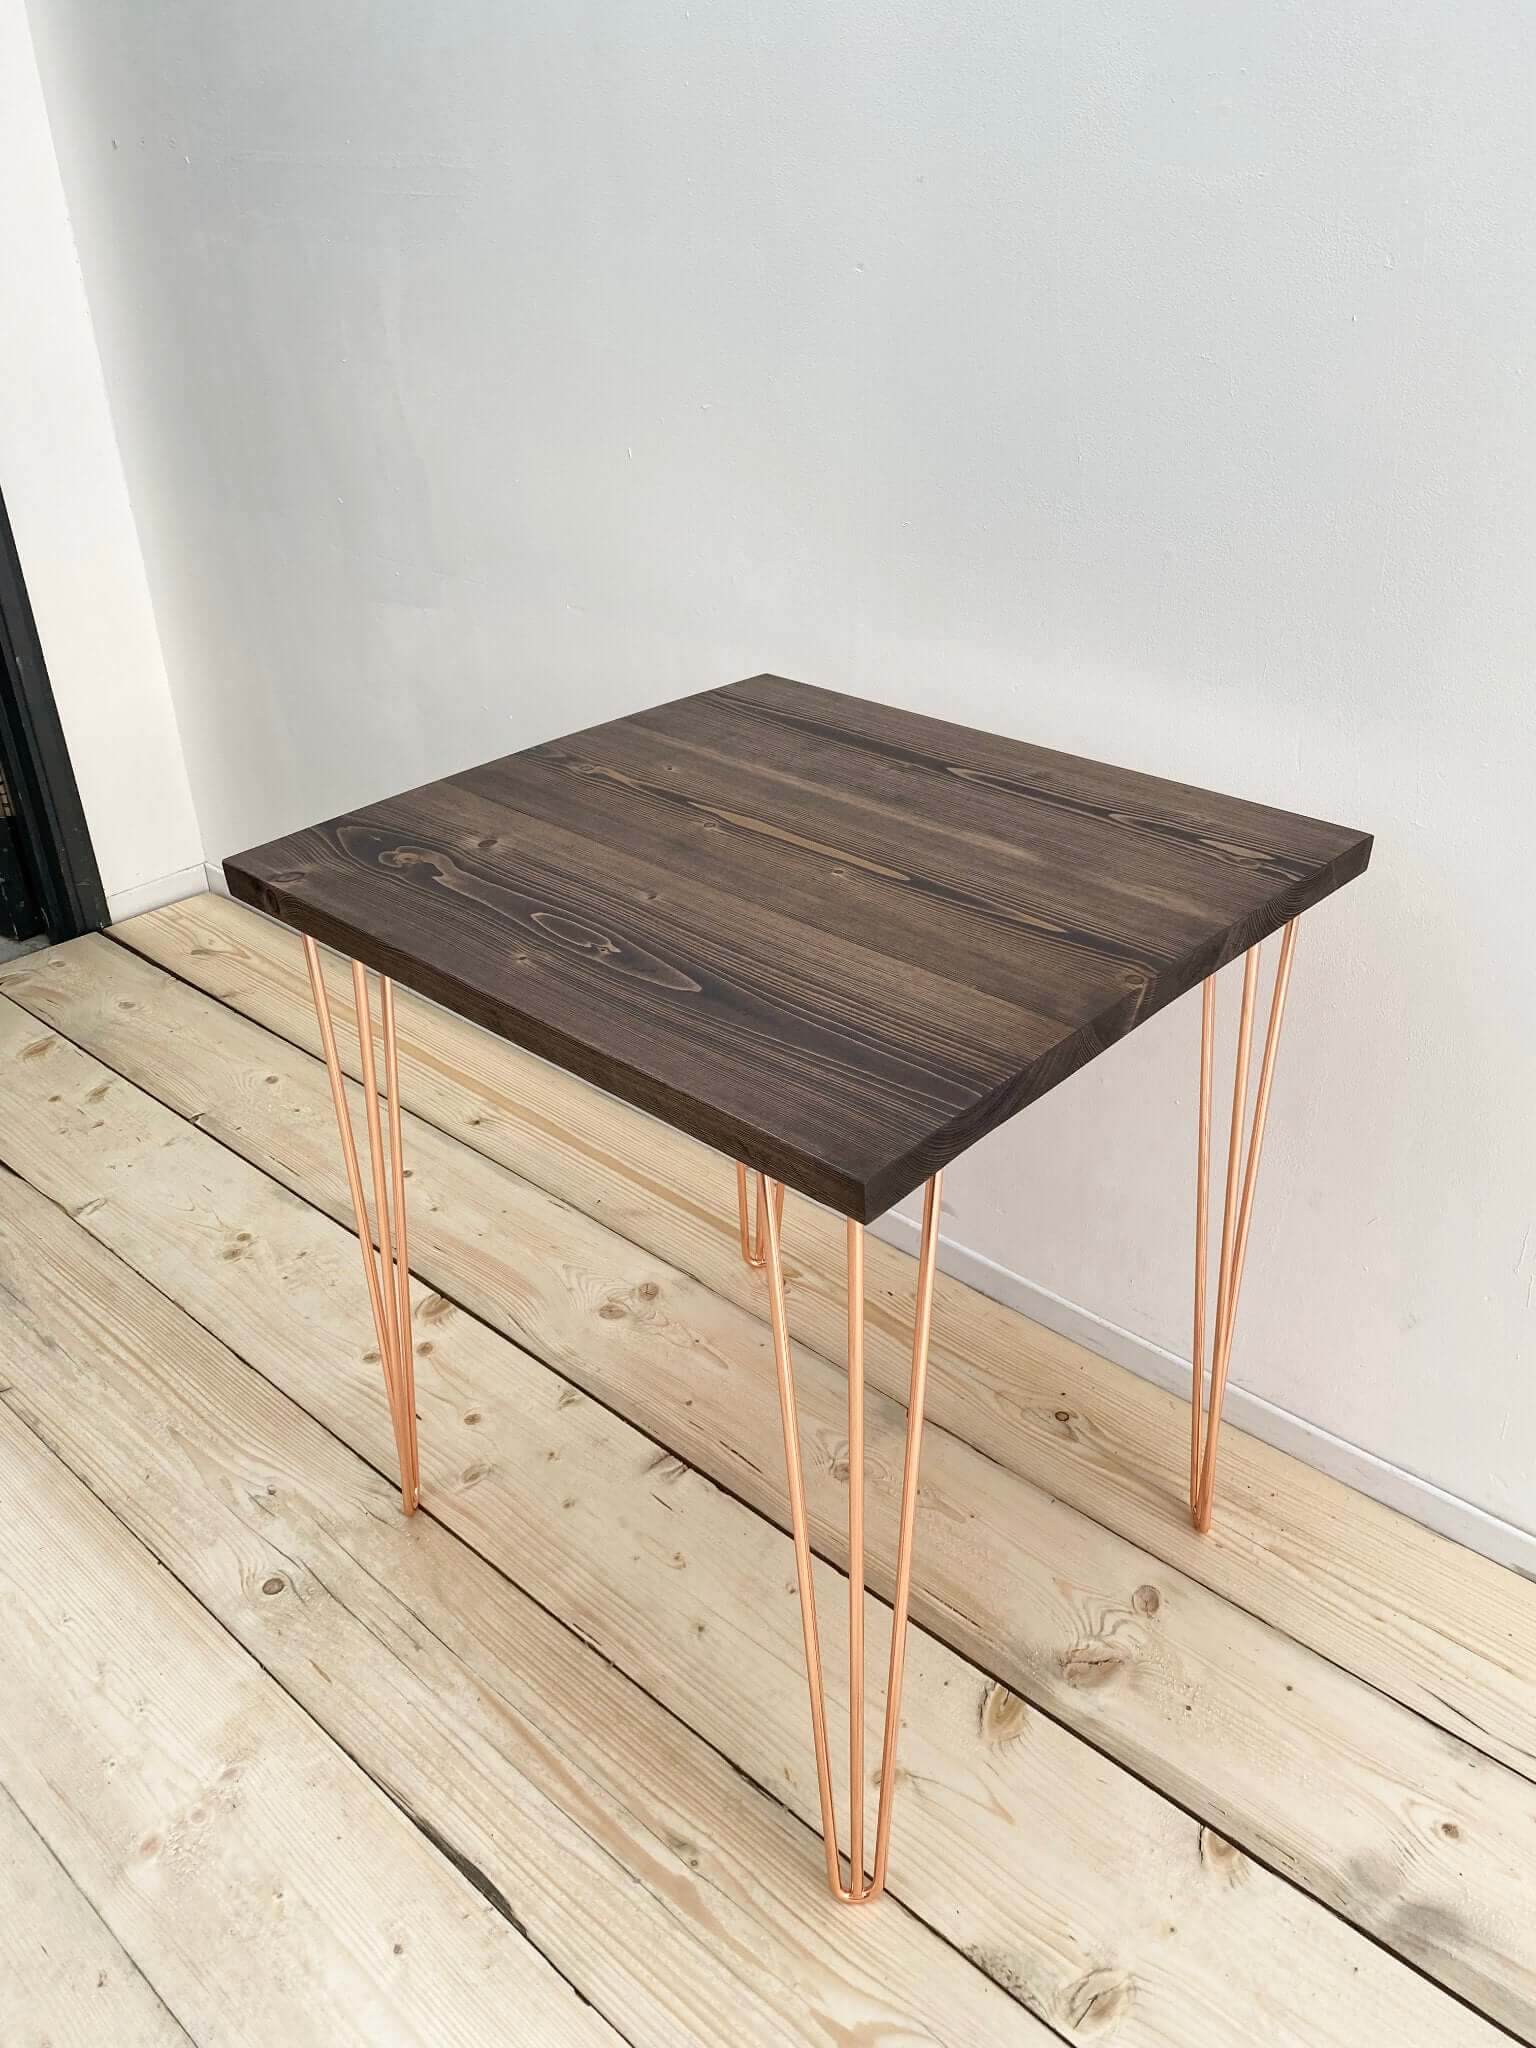 Reclaimed wood small dining table with hairpin legs.